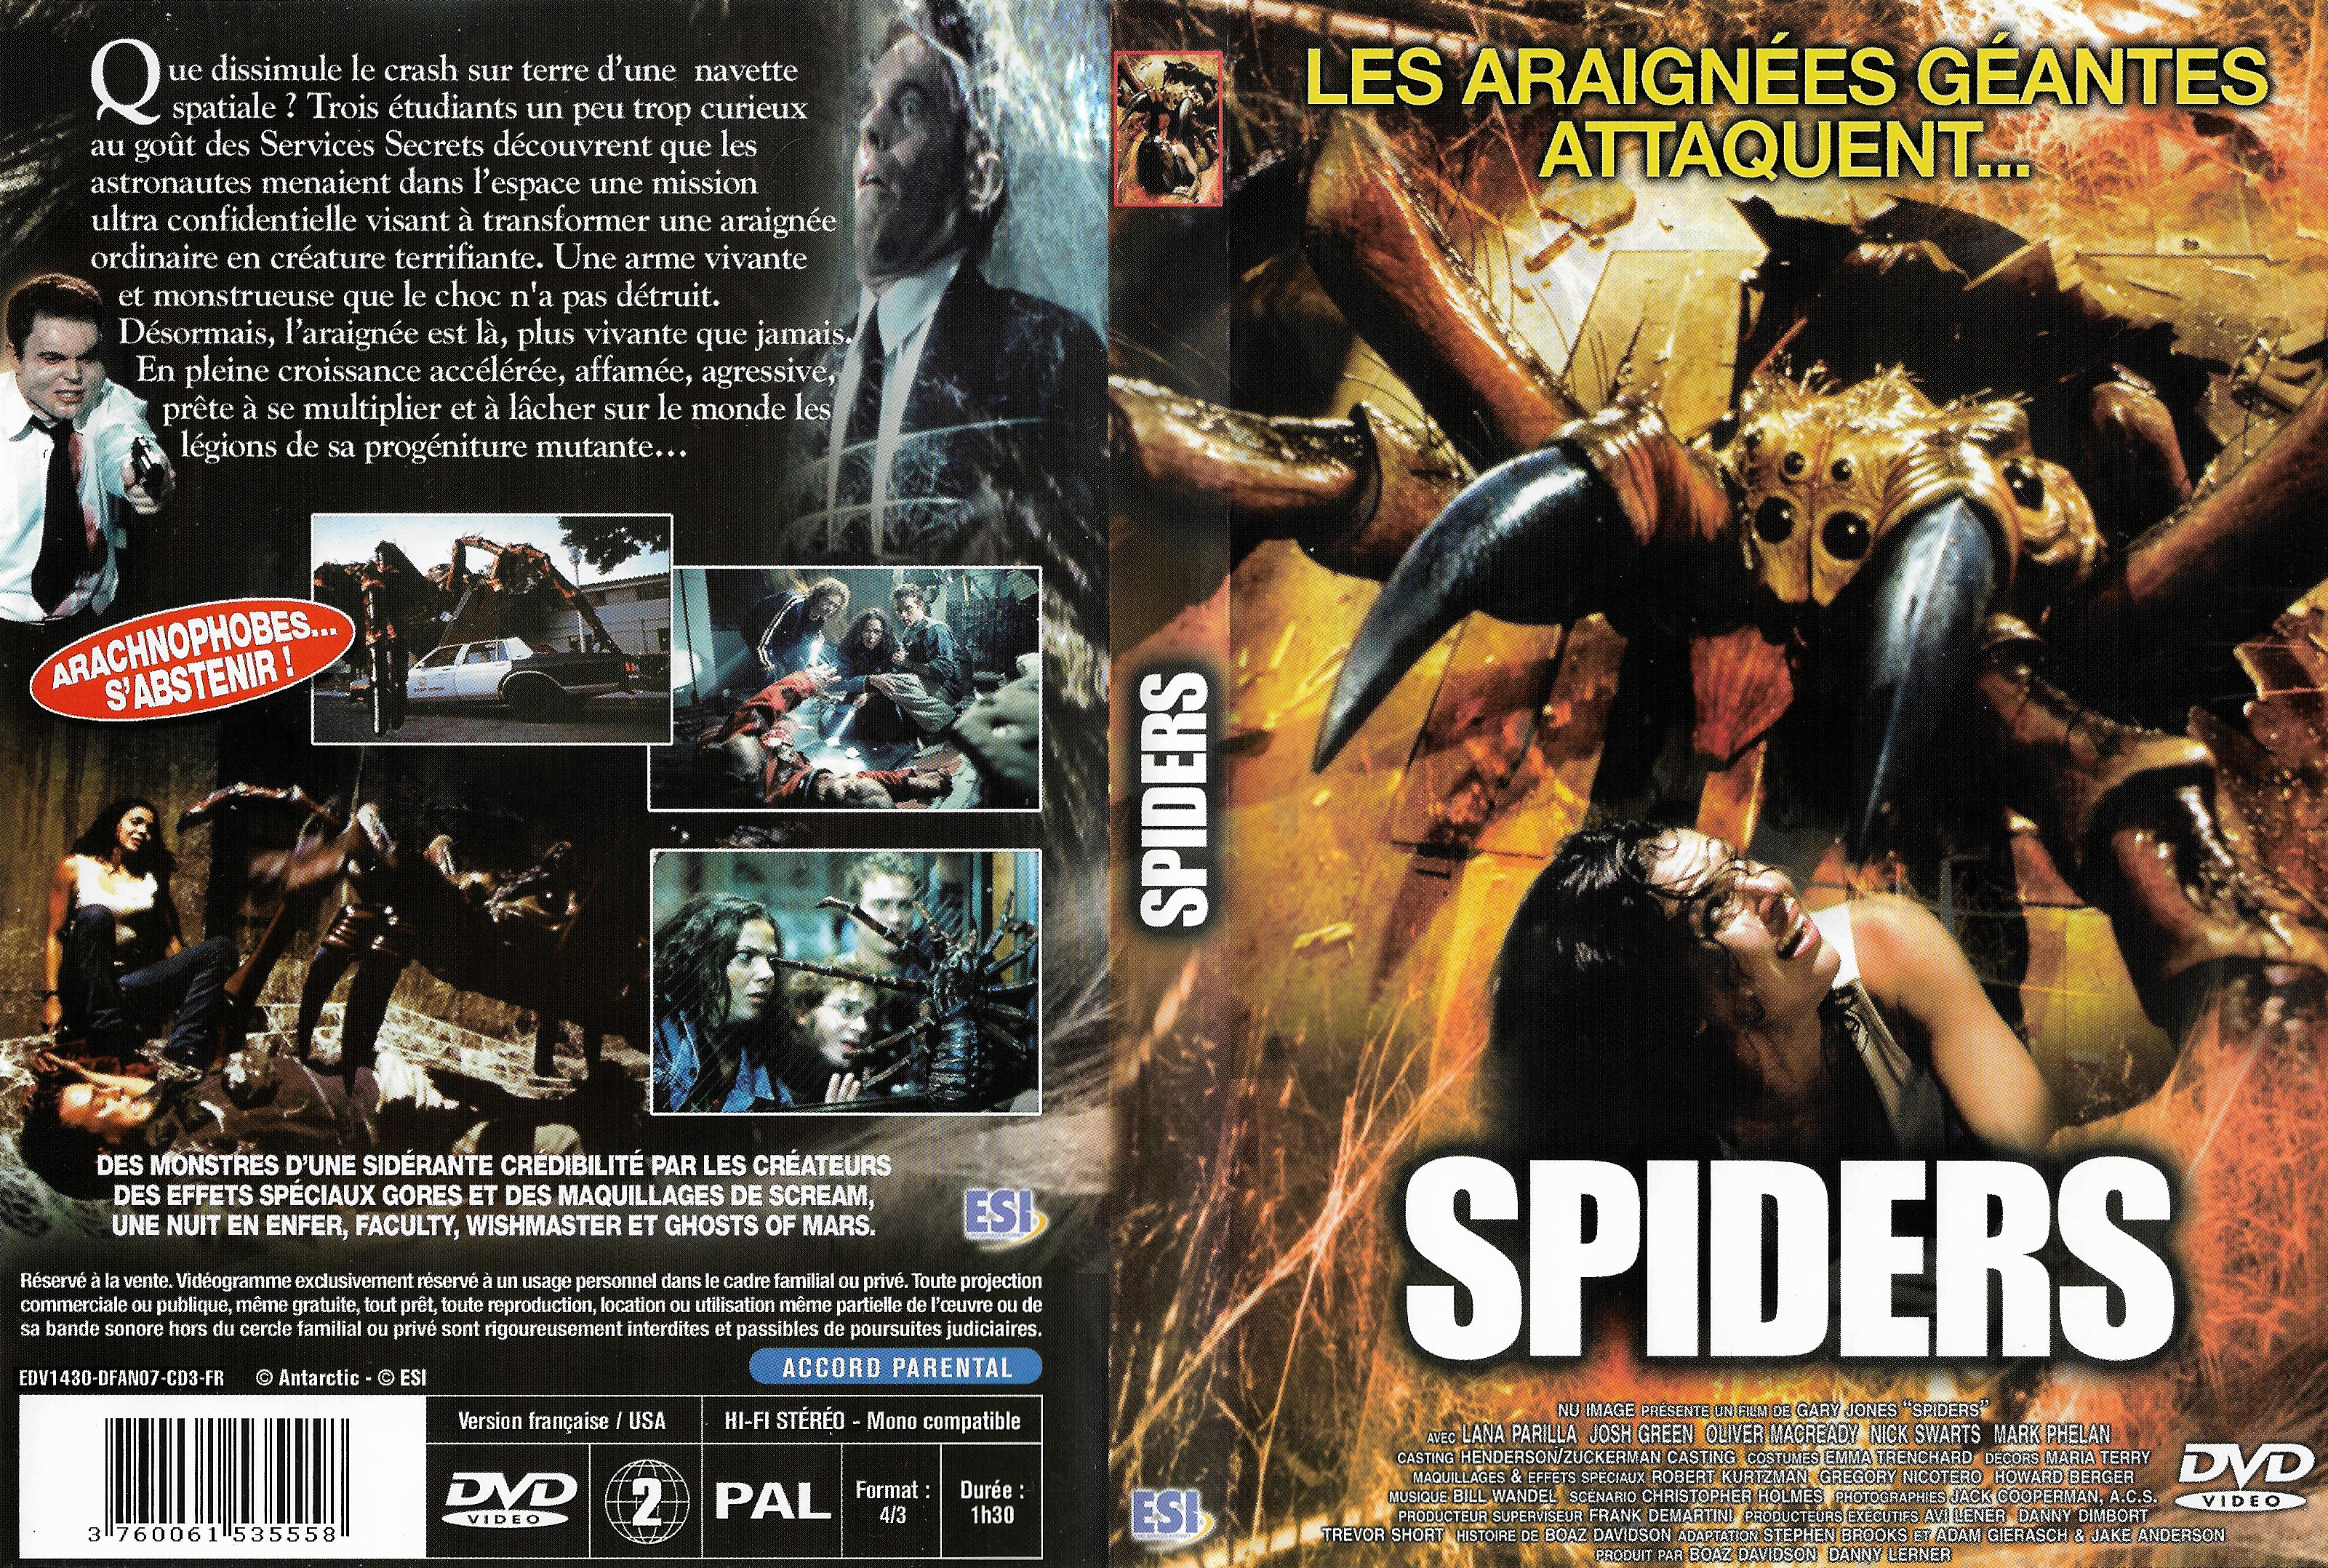 Jaquette DVD Spiders v2